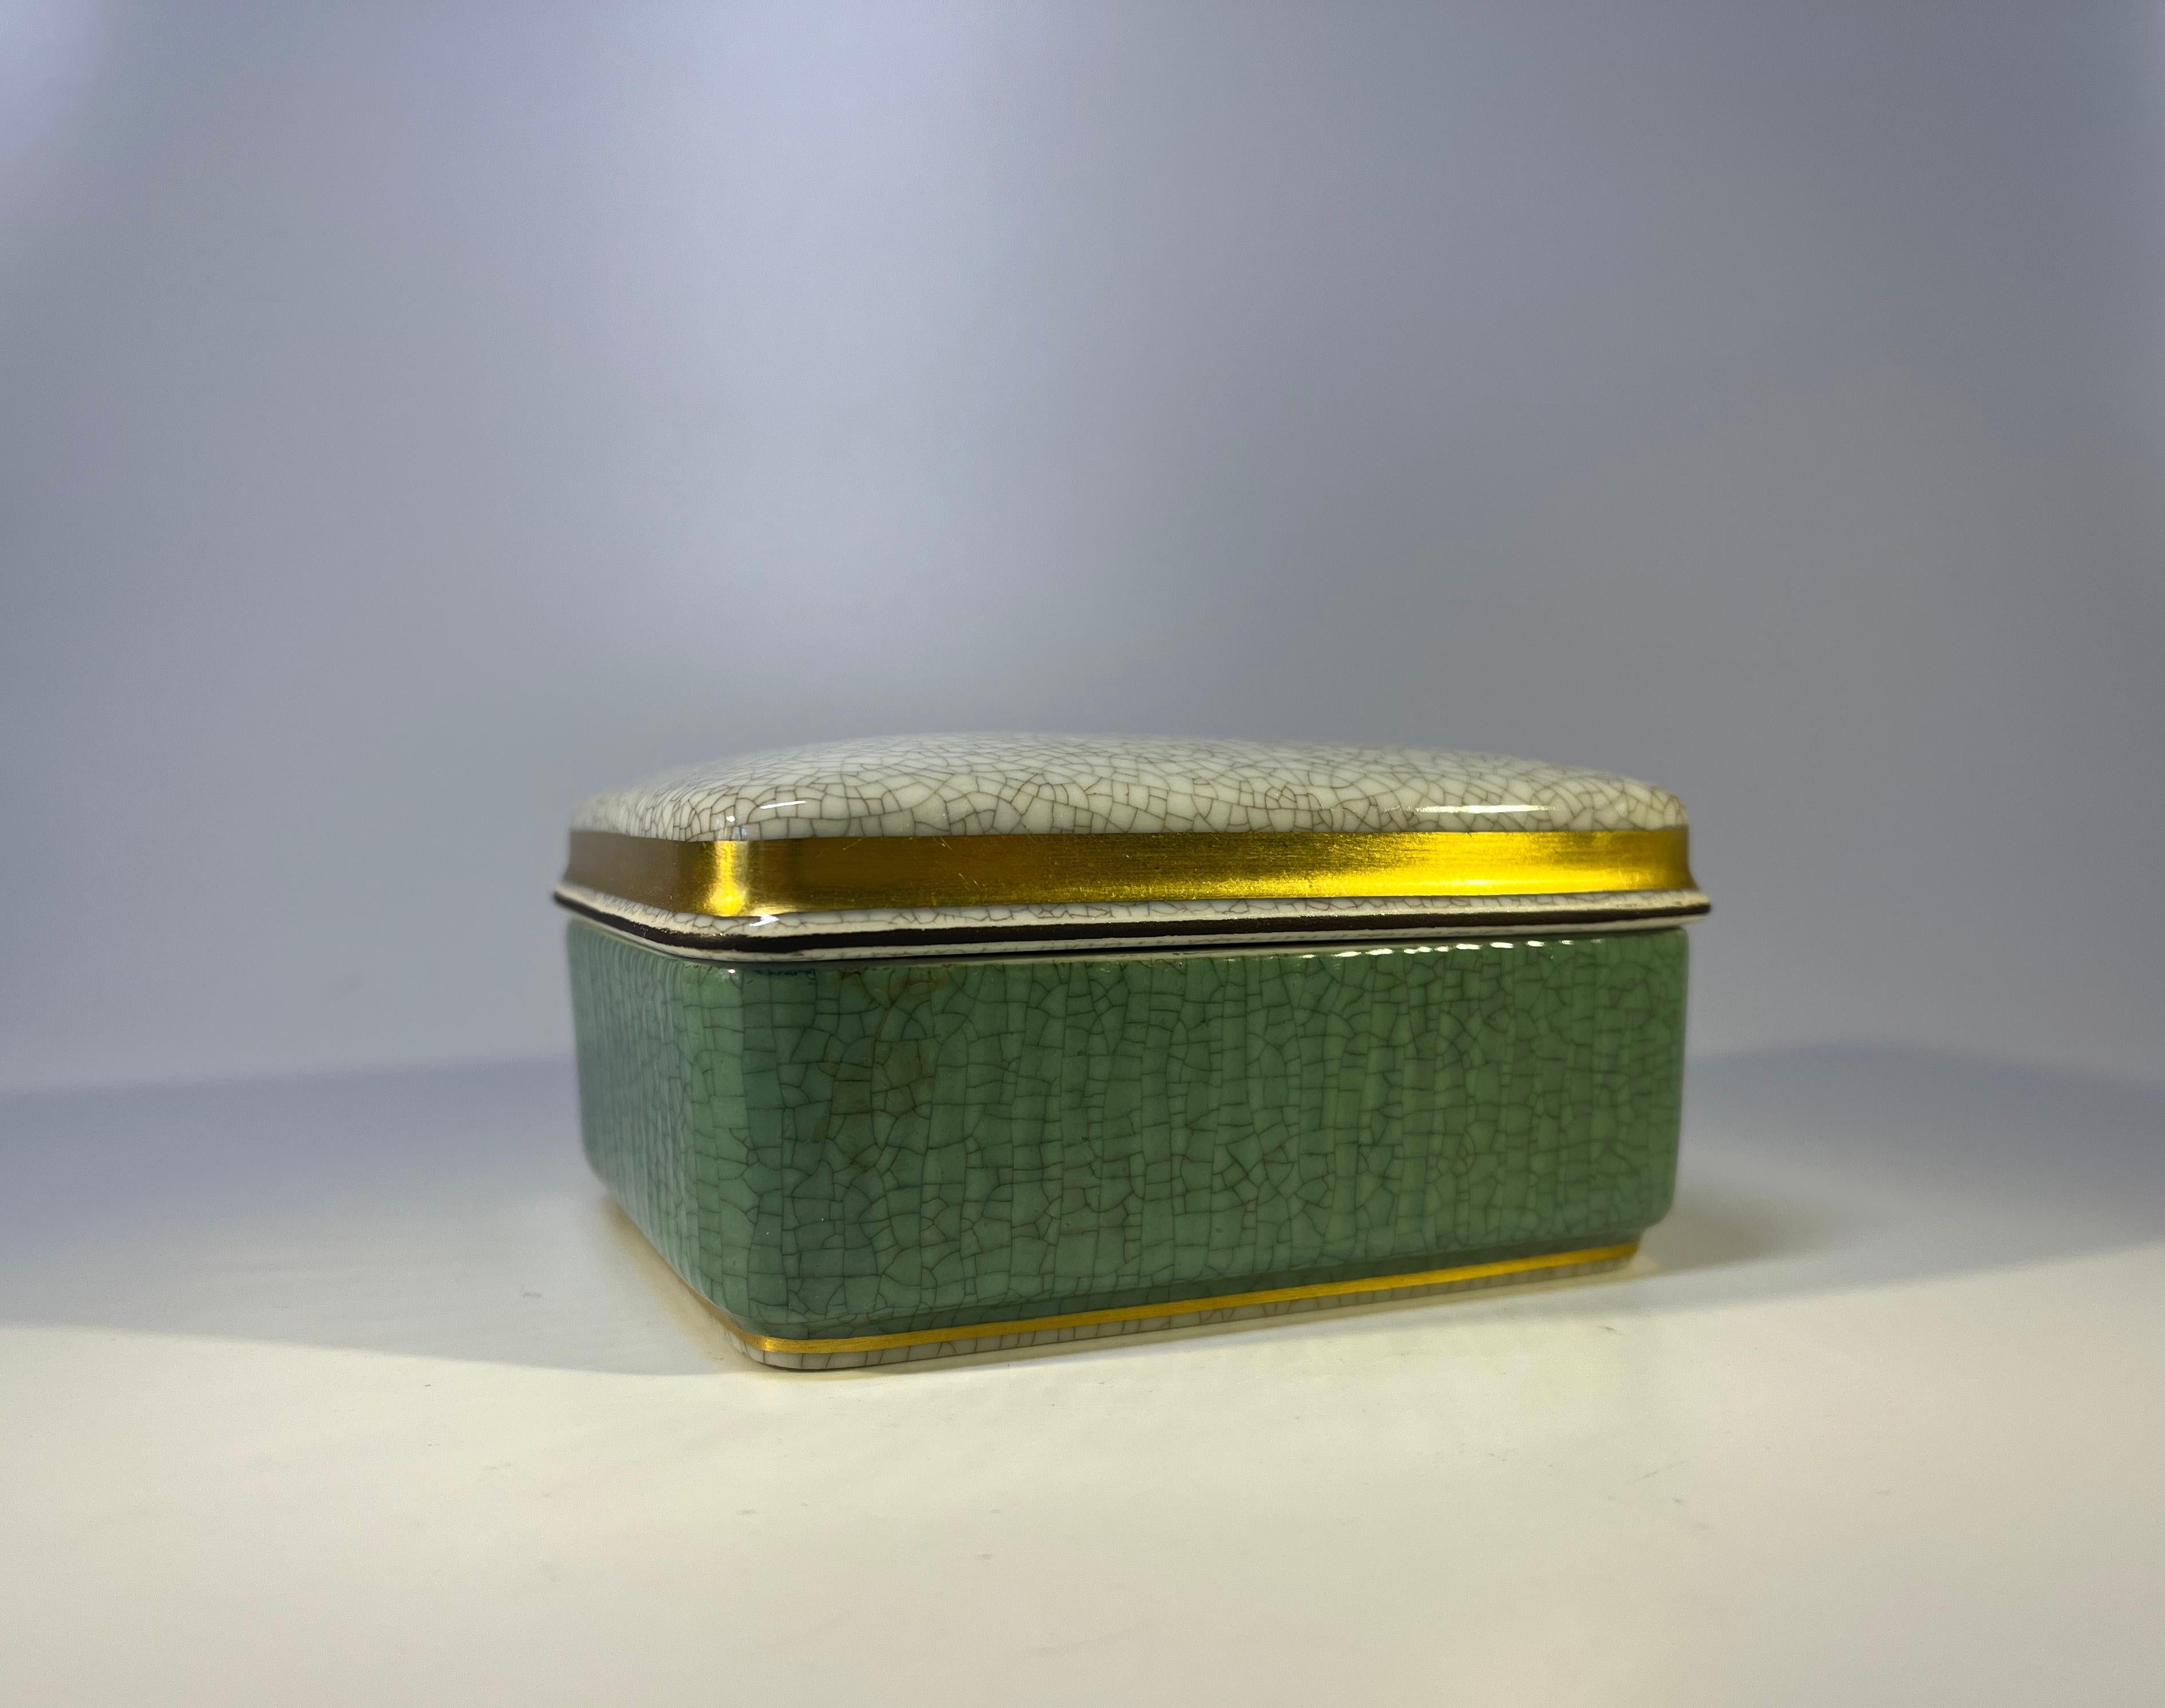 Royal Copenhagen pale green crackle glaze box with grey crackle glaze lid. Trimmed with gilt banding
Circa 1969-1973
Signed and numbered 4441
Height 2 inch, Width 4.25 inch, Depth 3.60 inch
In very good condition. Underglaze dimple on base.